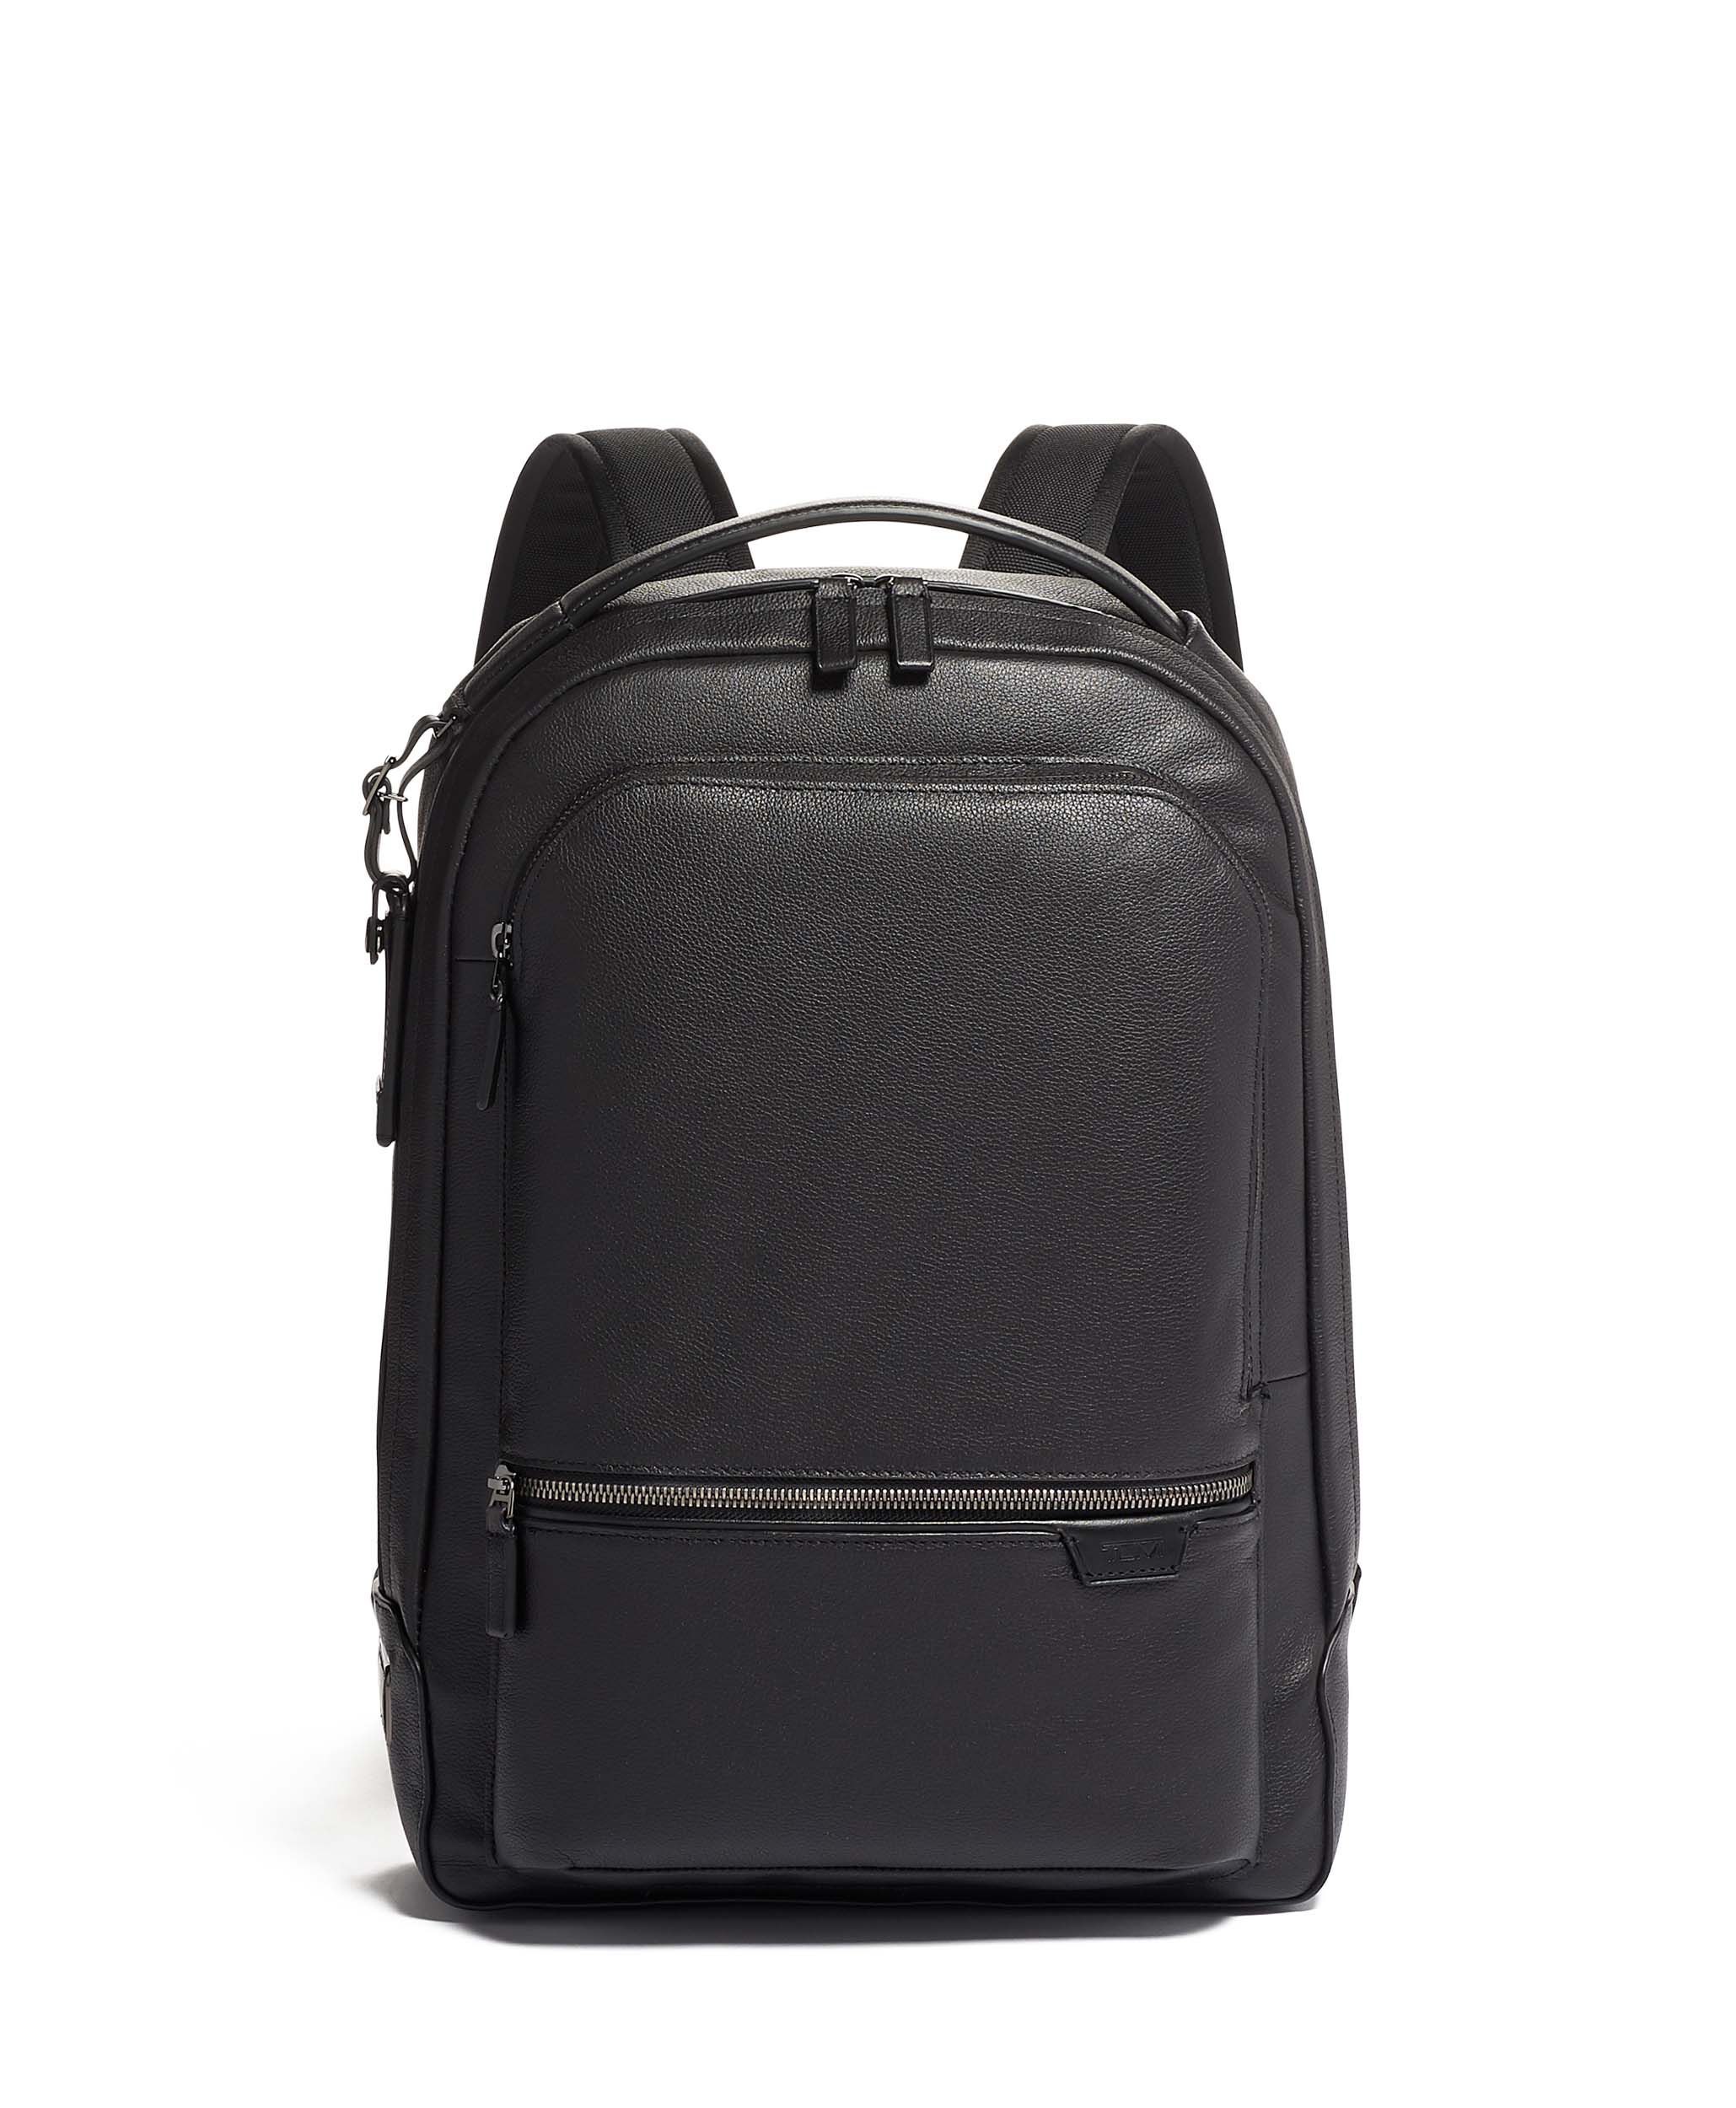 Harrison Collection | Briefcases, Backpacks & Messenger Bags | TUMI